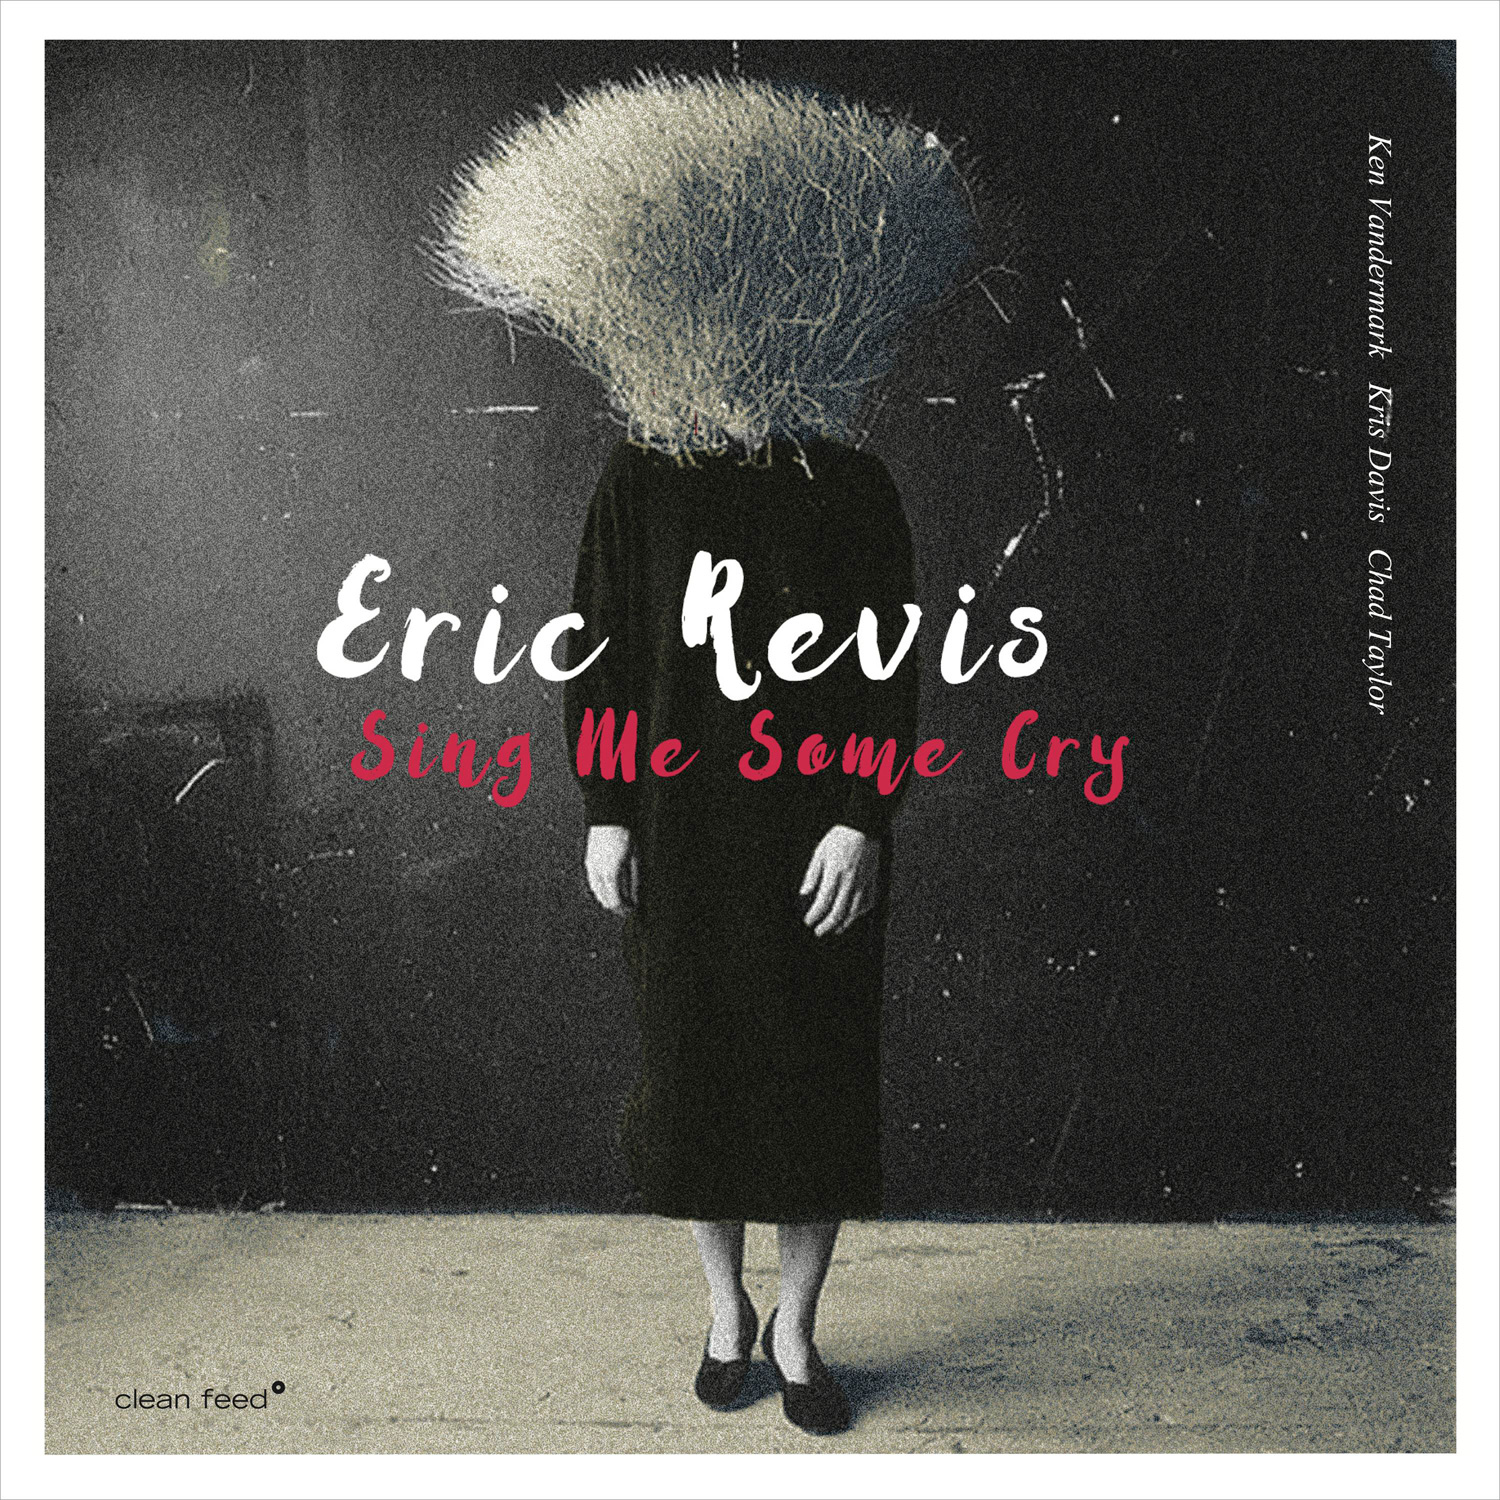 Eric Revis - Sing Me Some Cry (2017) [HDTracks FLAC 24bit/96kHz]